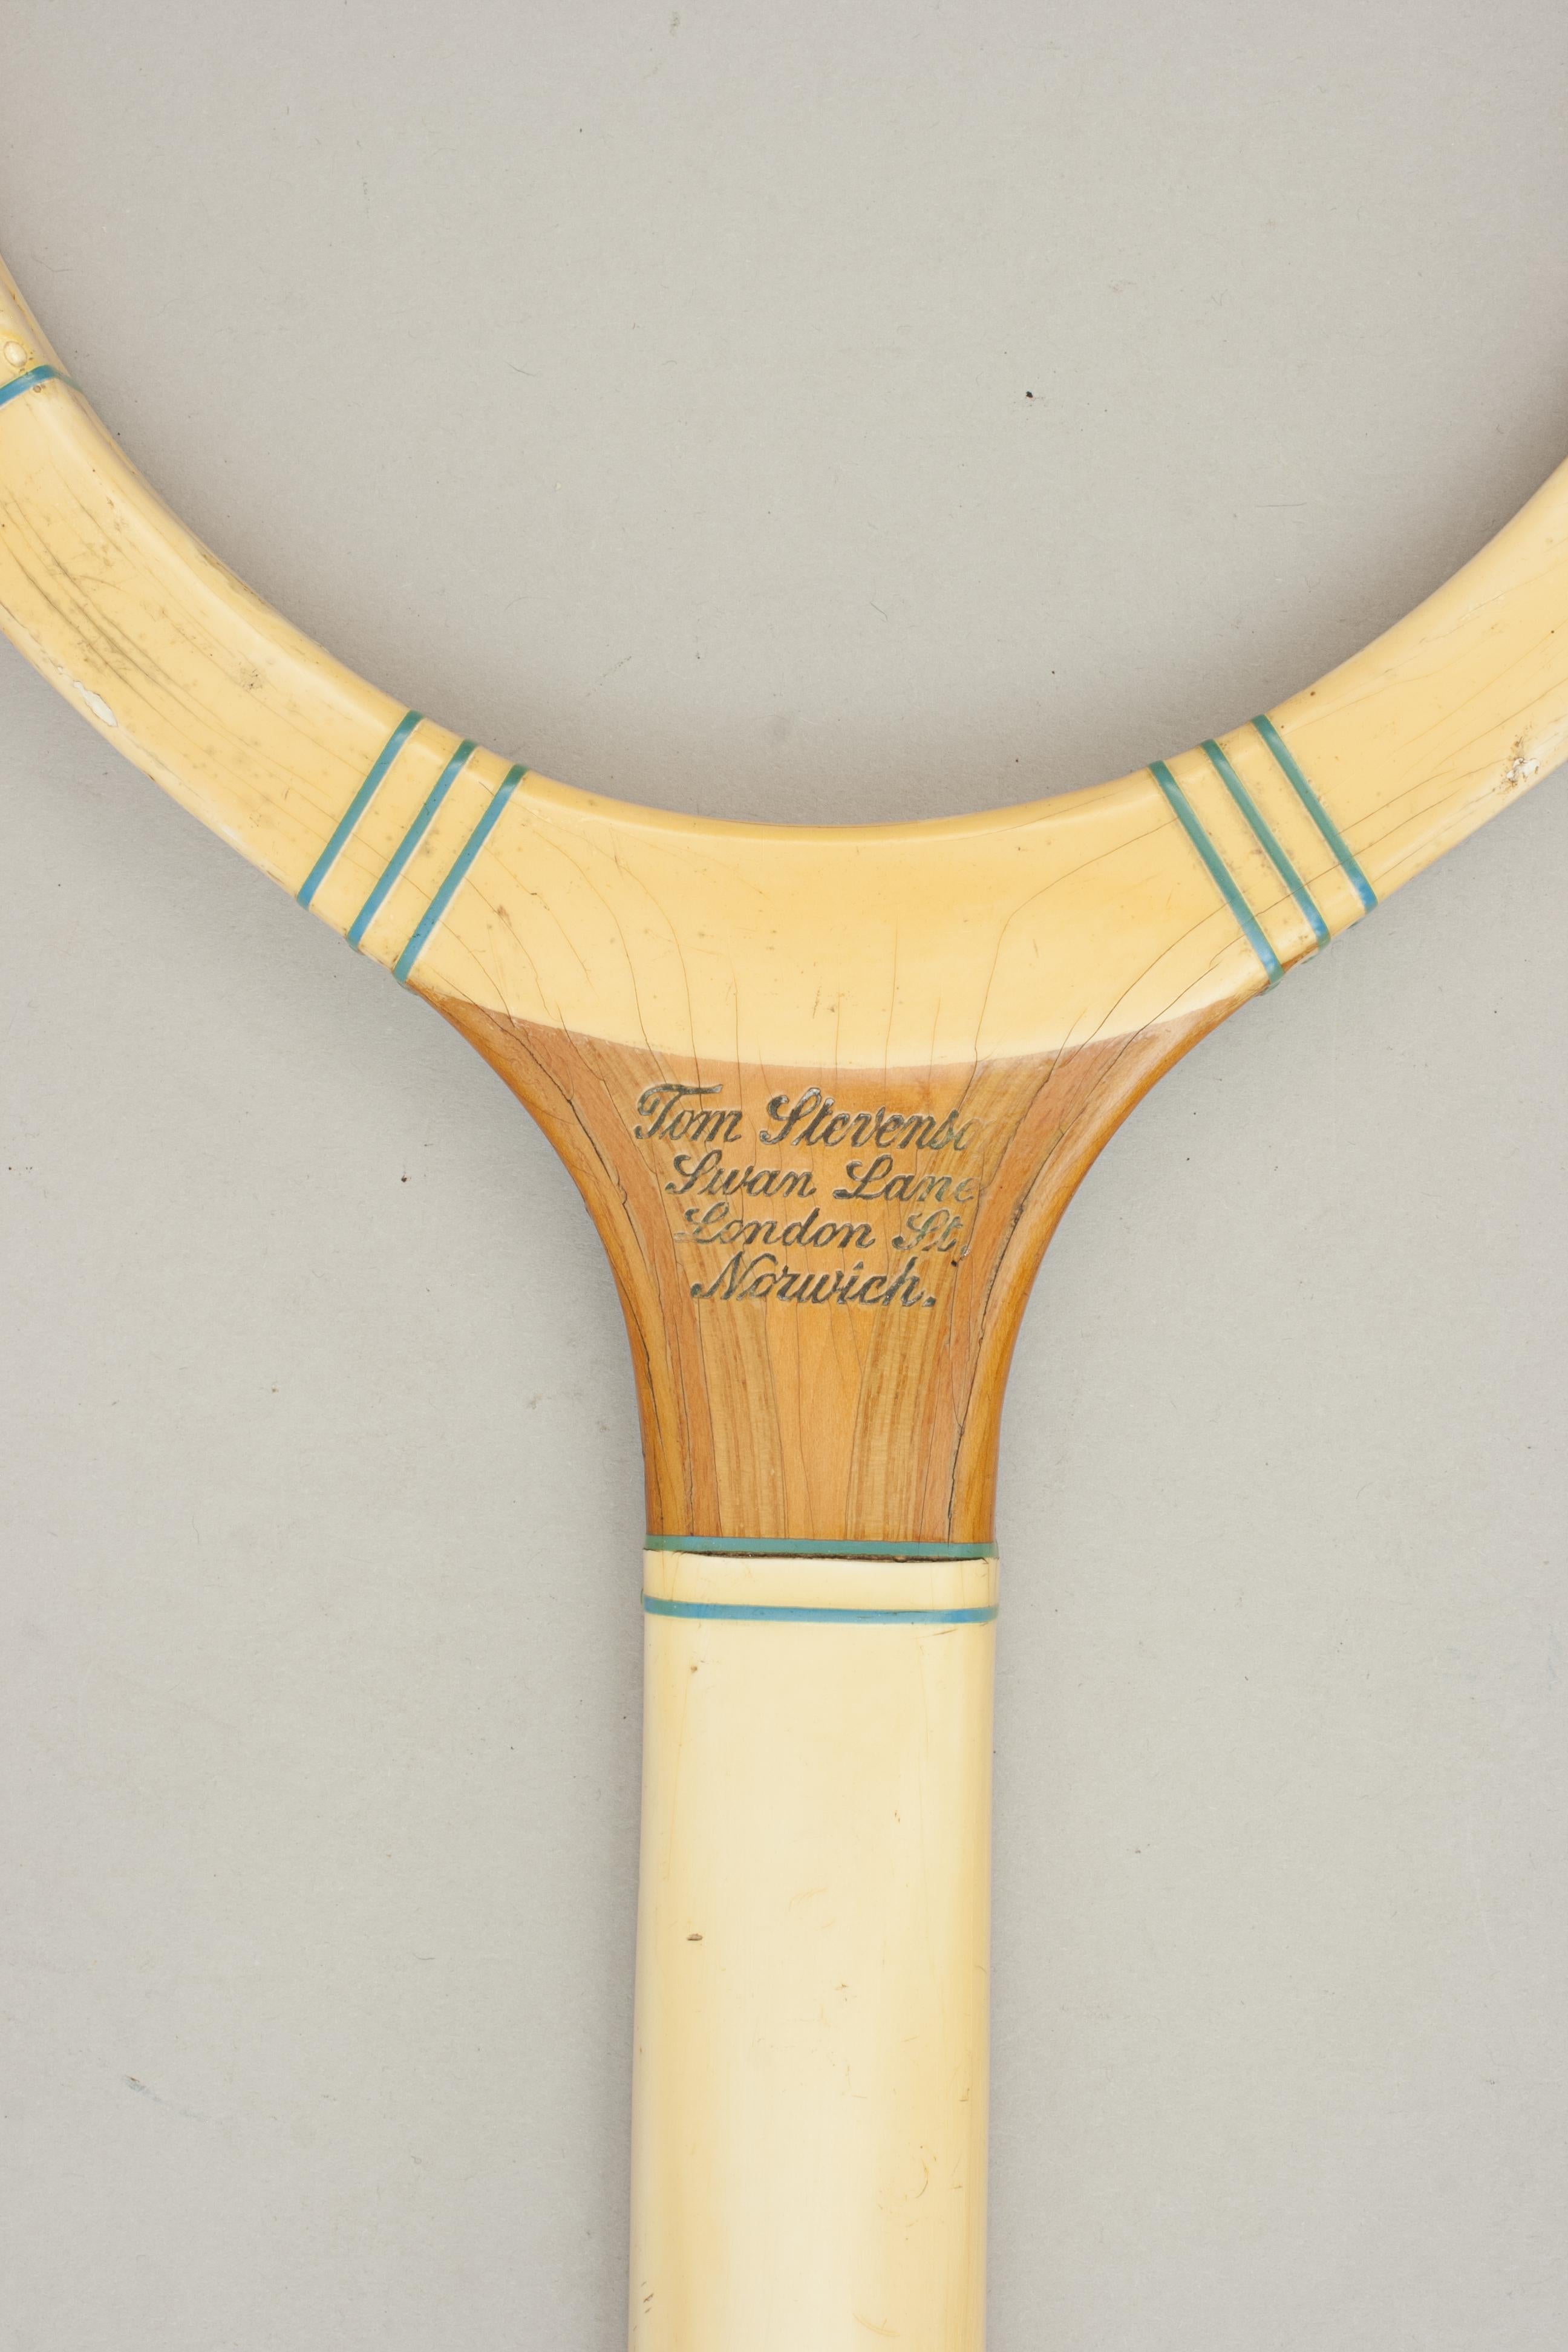 Mid-20th Century Vintage Lawn Tennis Racket, the Test by Stevenson